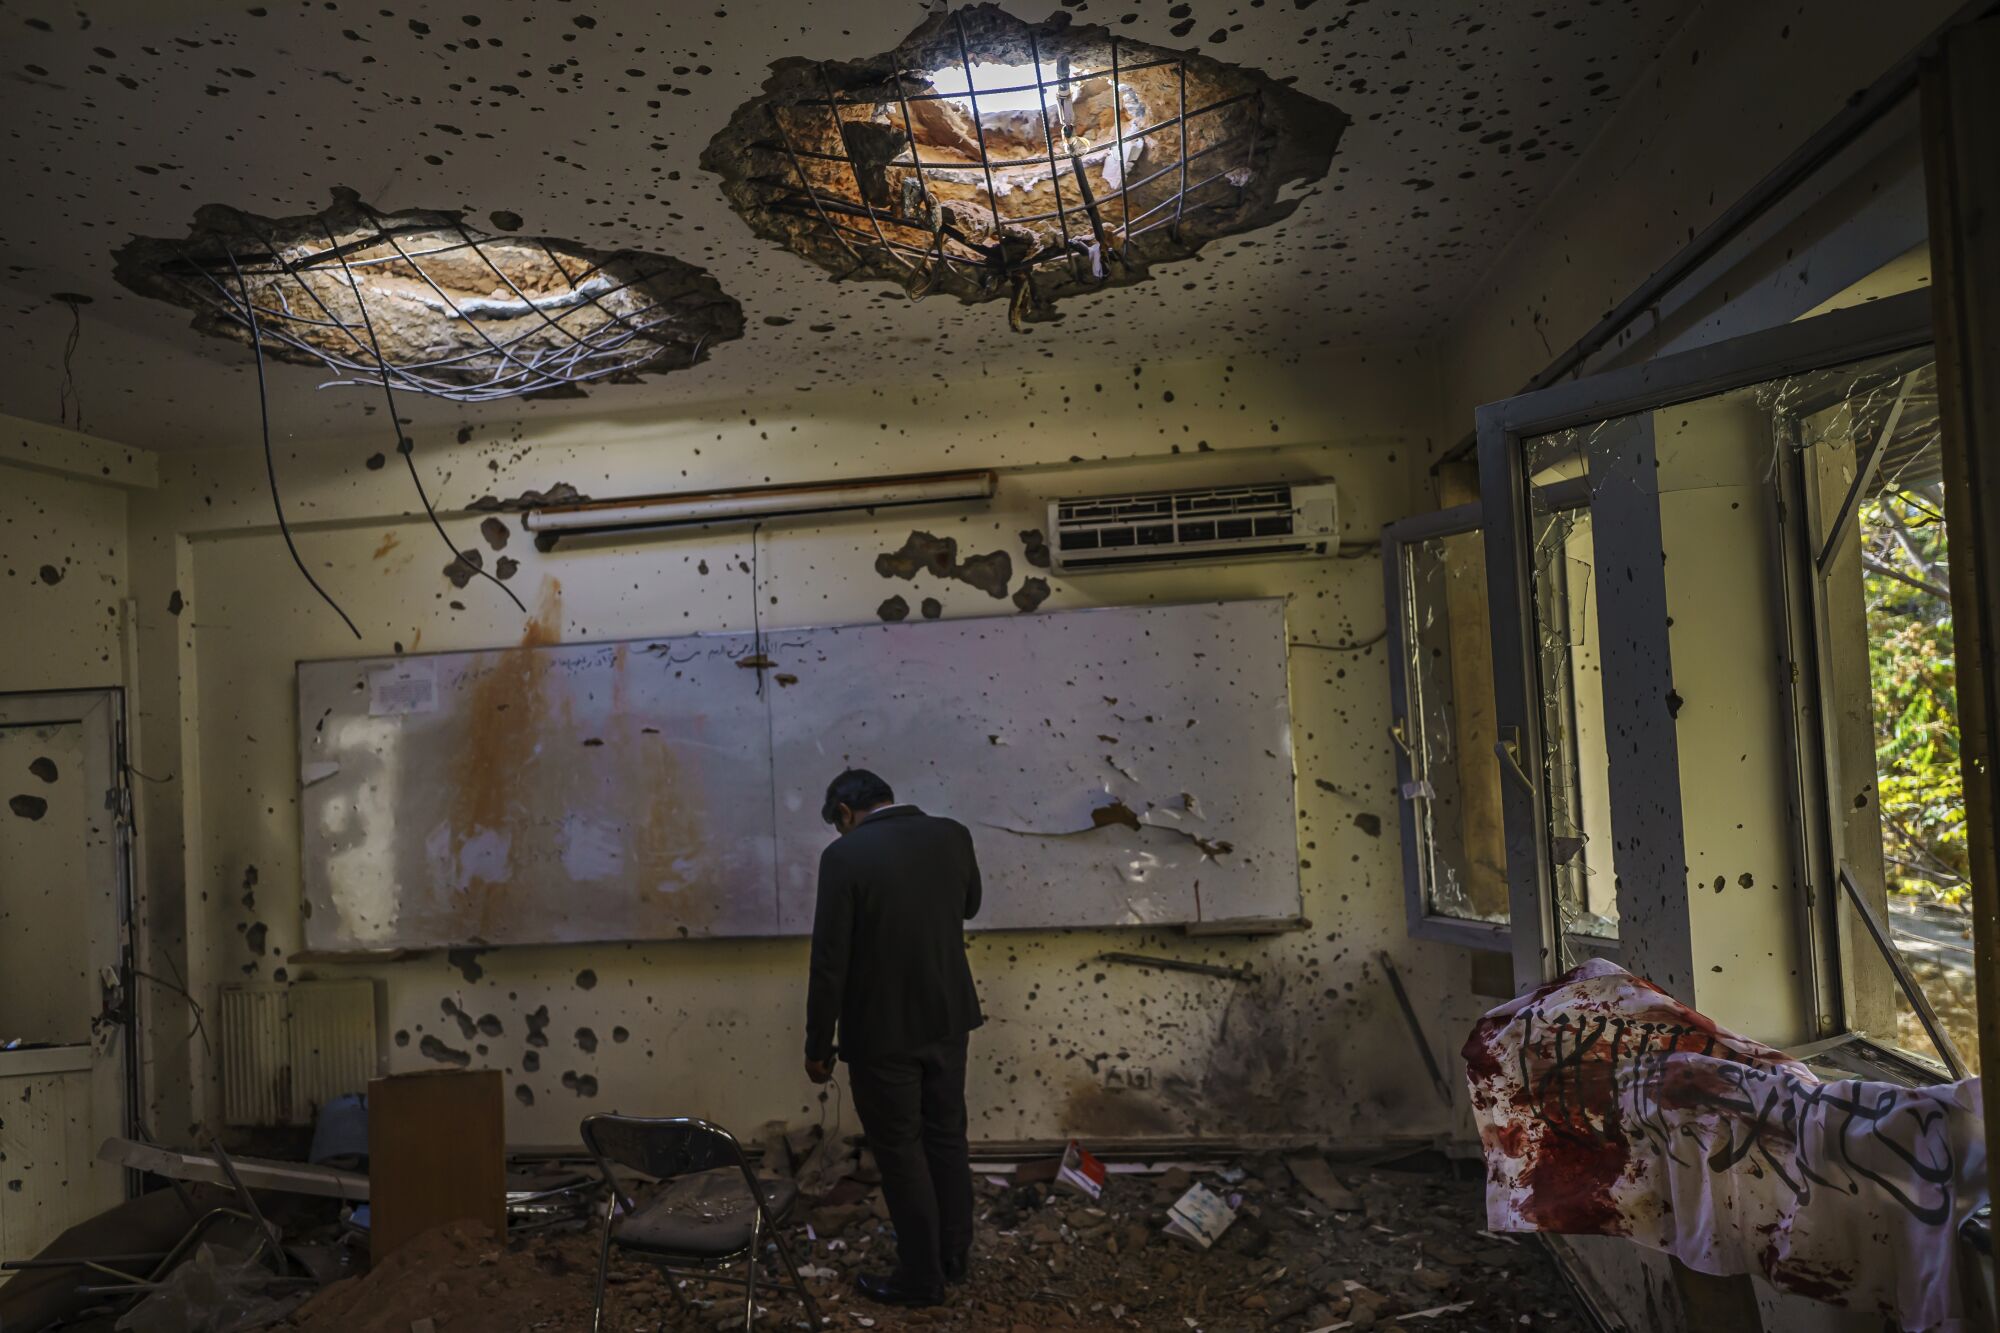 A man stands, hanging his head, inside a classroom with broken windows, holes in the ceiling and debris on the floor.